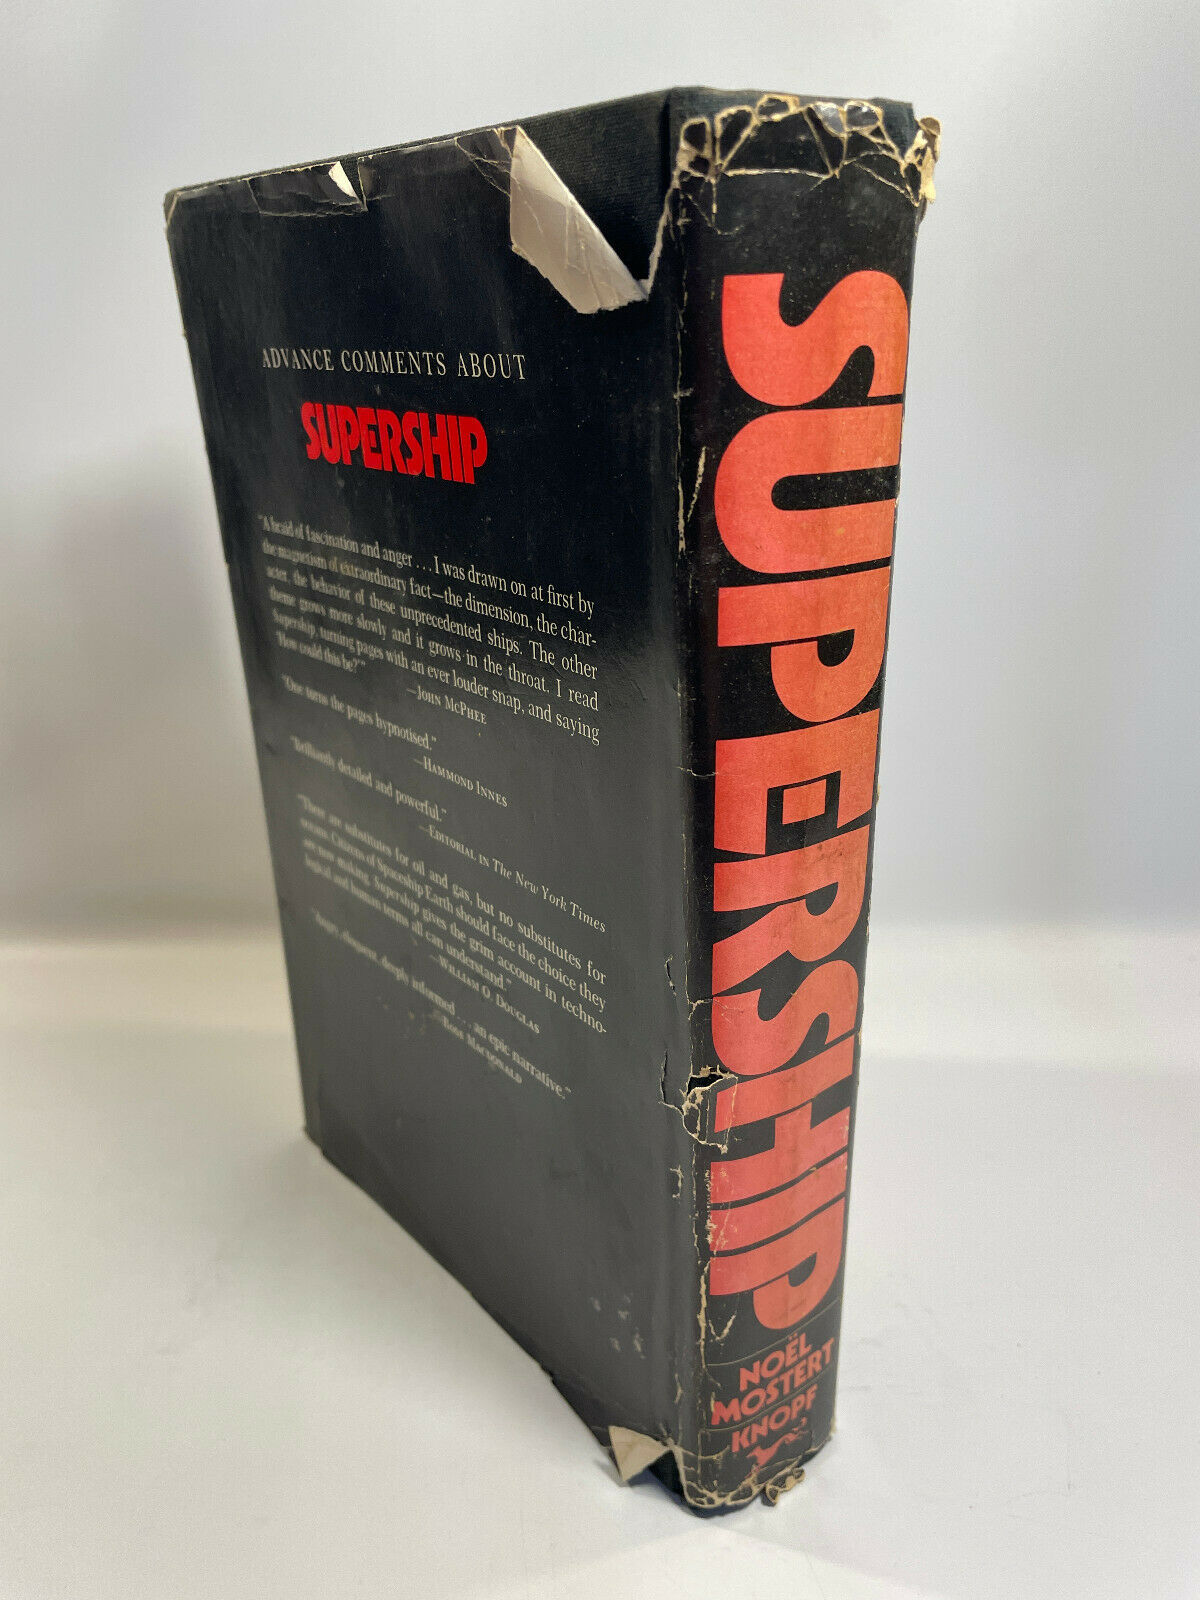 Supership by Noel Mostert (1974, Hardcover) (A1)